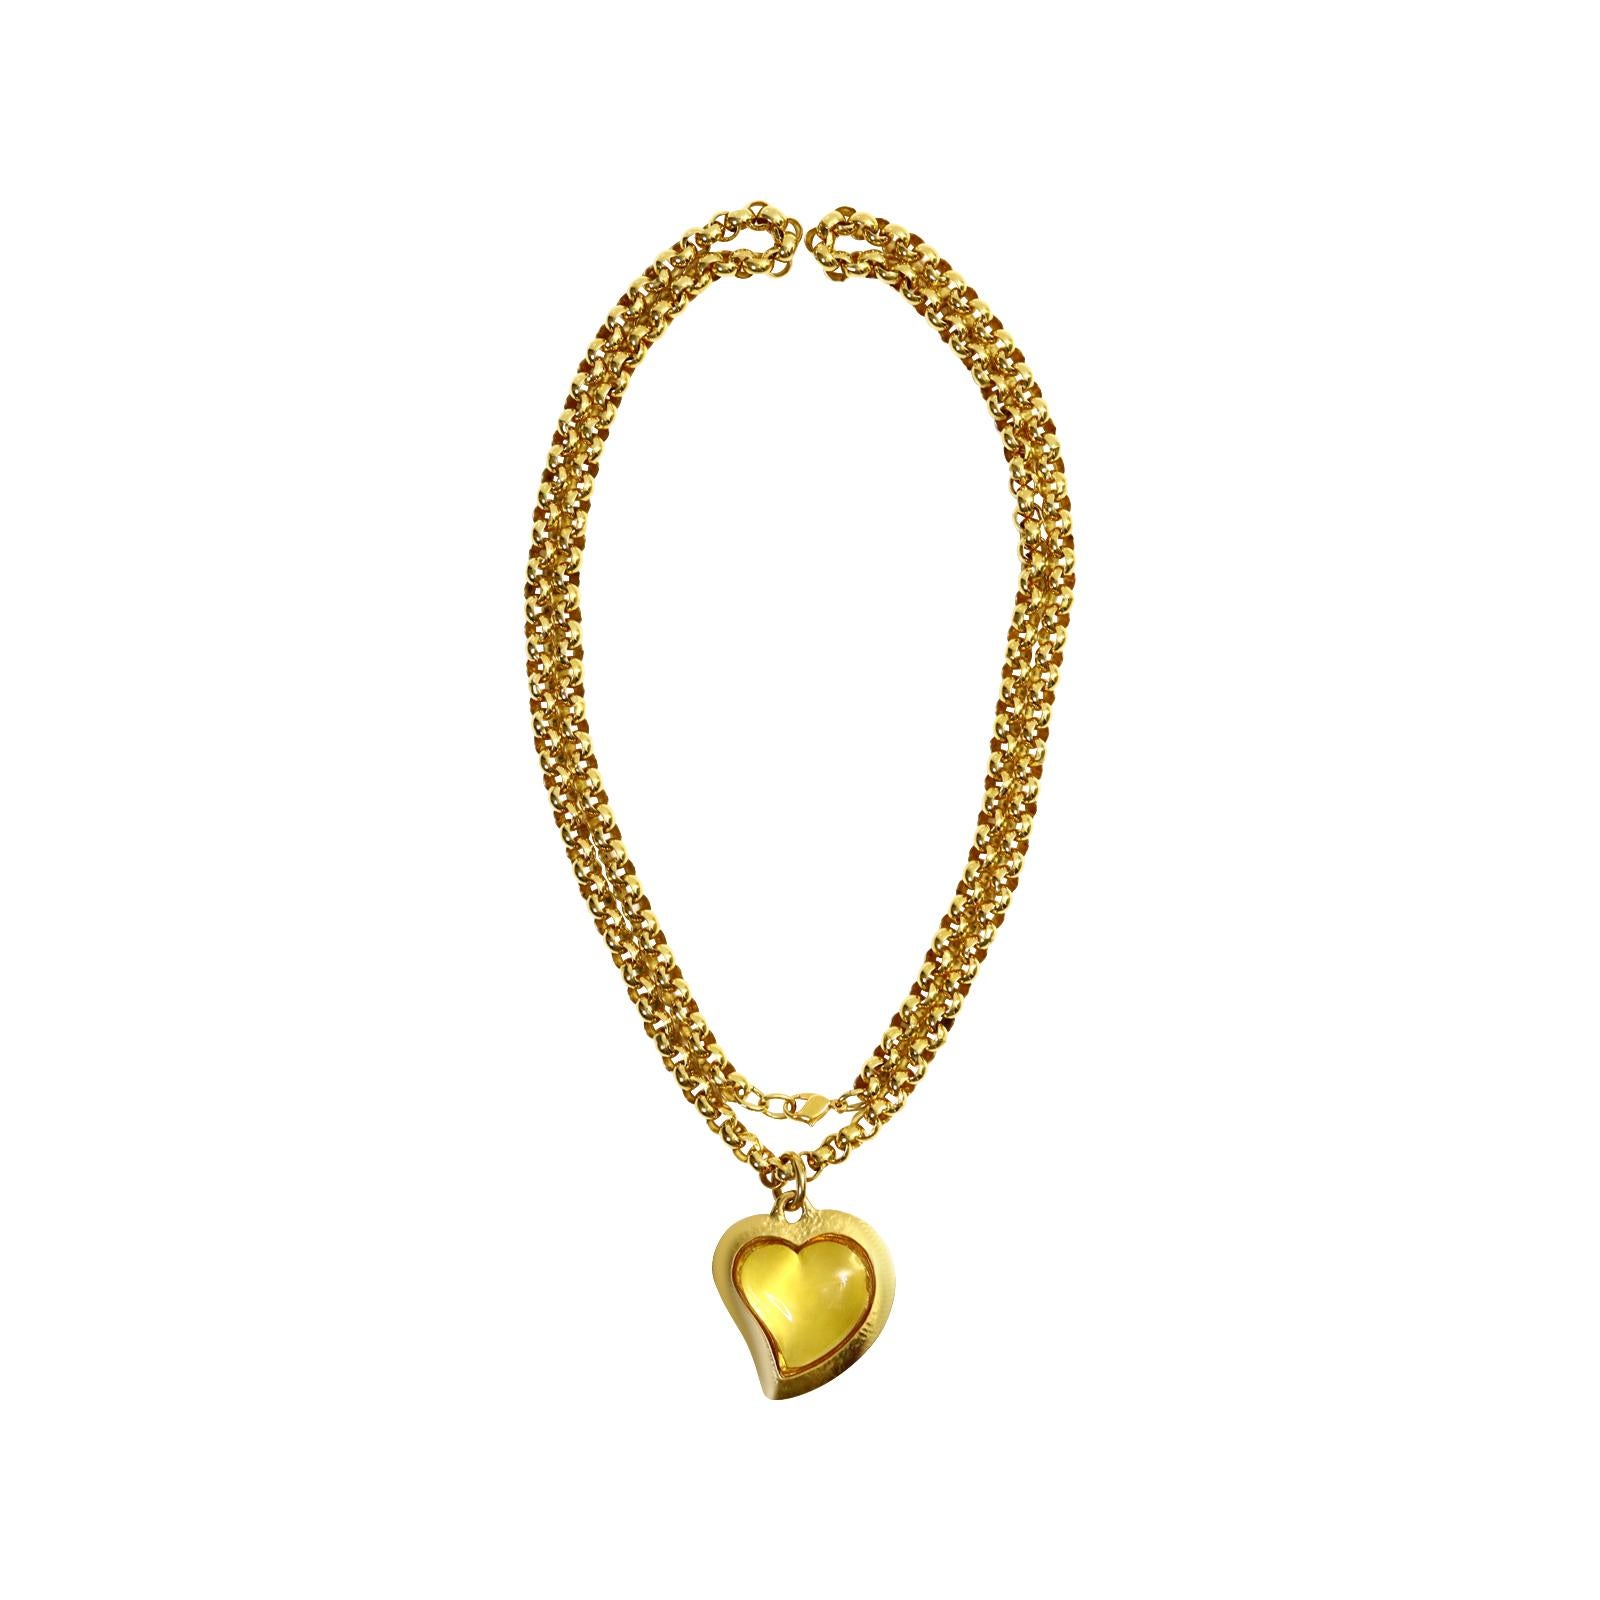 Vintage Yves Saint Laurent YSL Amber Resin Heart on Rollo Long Chain Circa 1980s For Sale 5